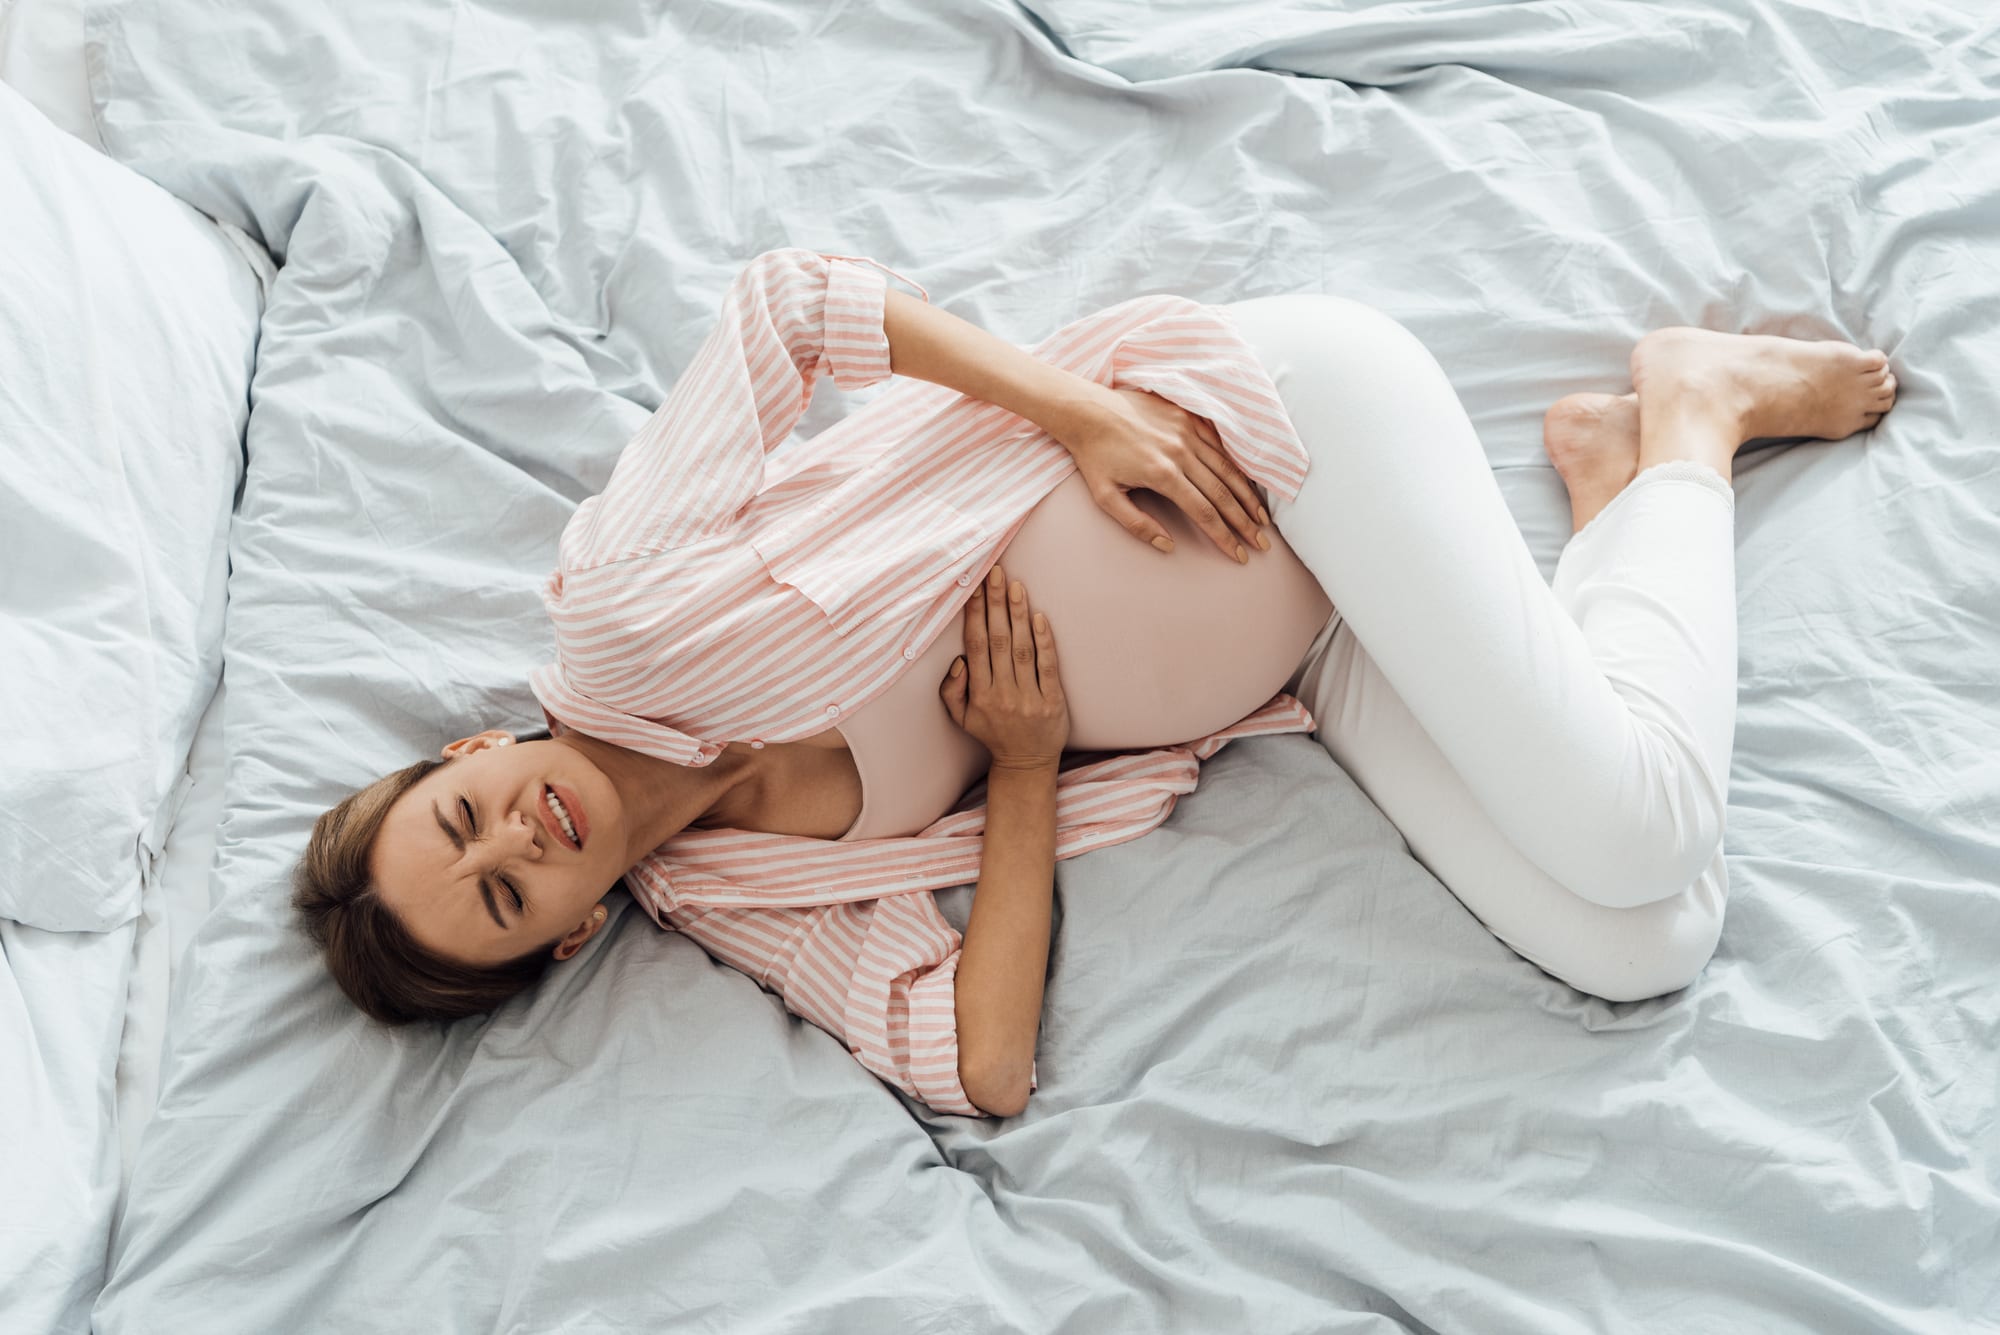 signs of preeclampsia that you need to know #childbirth #pregnancy #preeclampsia #pregnancydangersigns #miscarriage